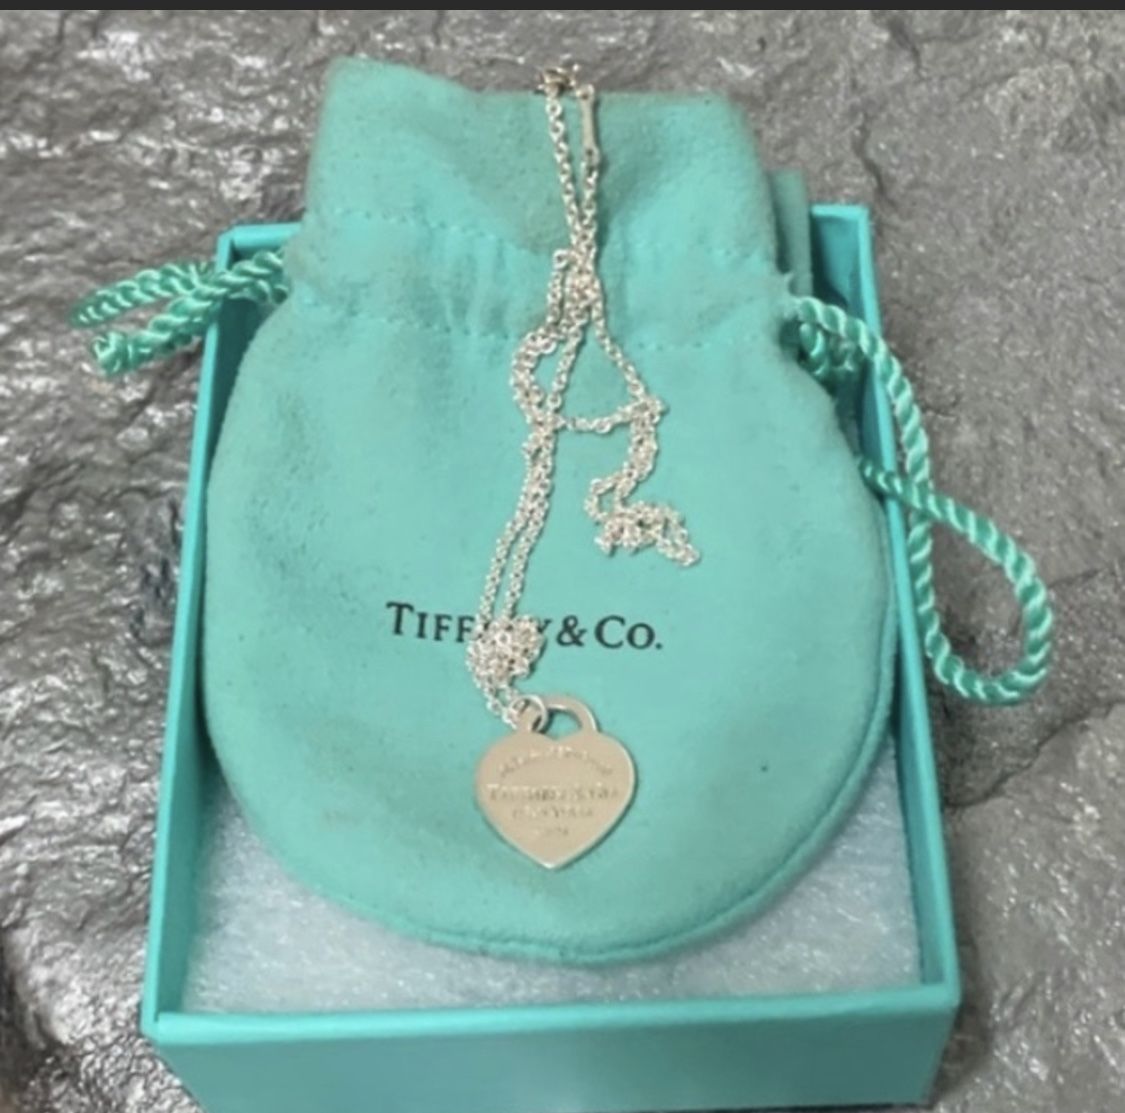 Tiffany & Co MED authentic Rare & beautiful Return to Tiffany pendant w 15” Peretti necklace comes with pouch/ like new ! Never wore necklace $165